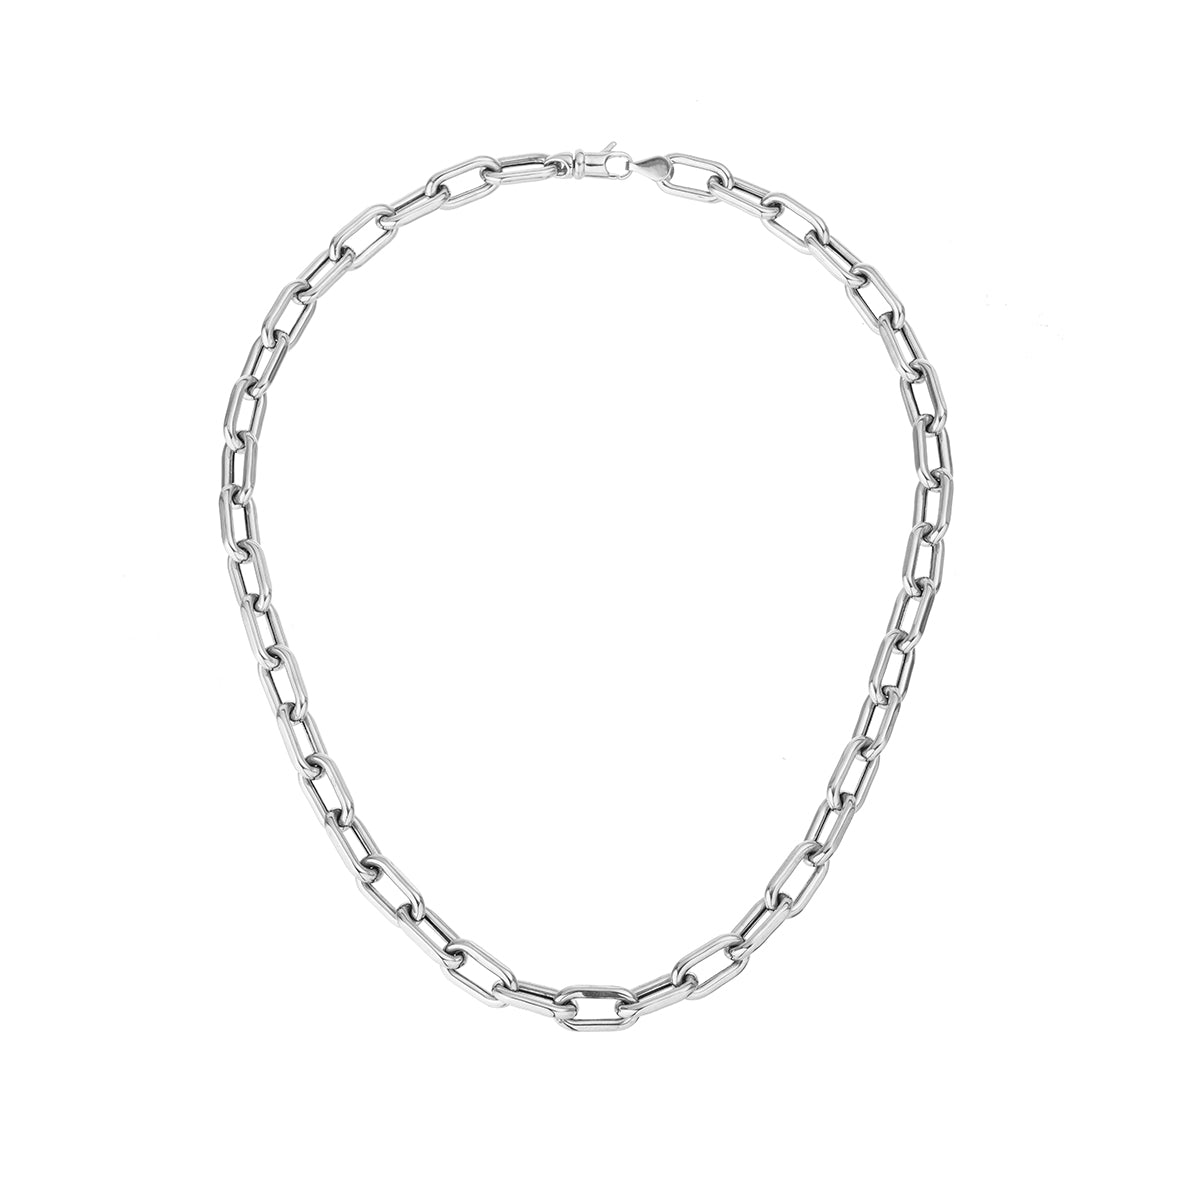 7mm Italian Chain Link Necklace in Sterling Silver